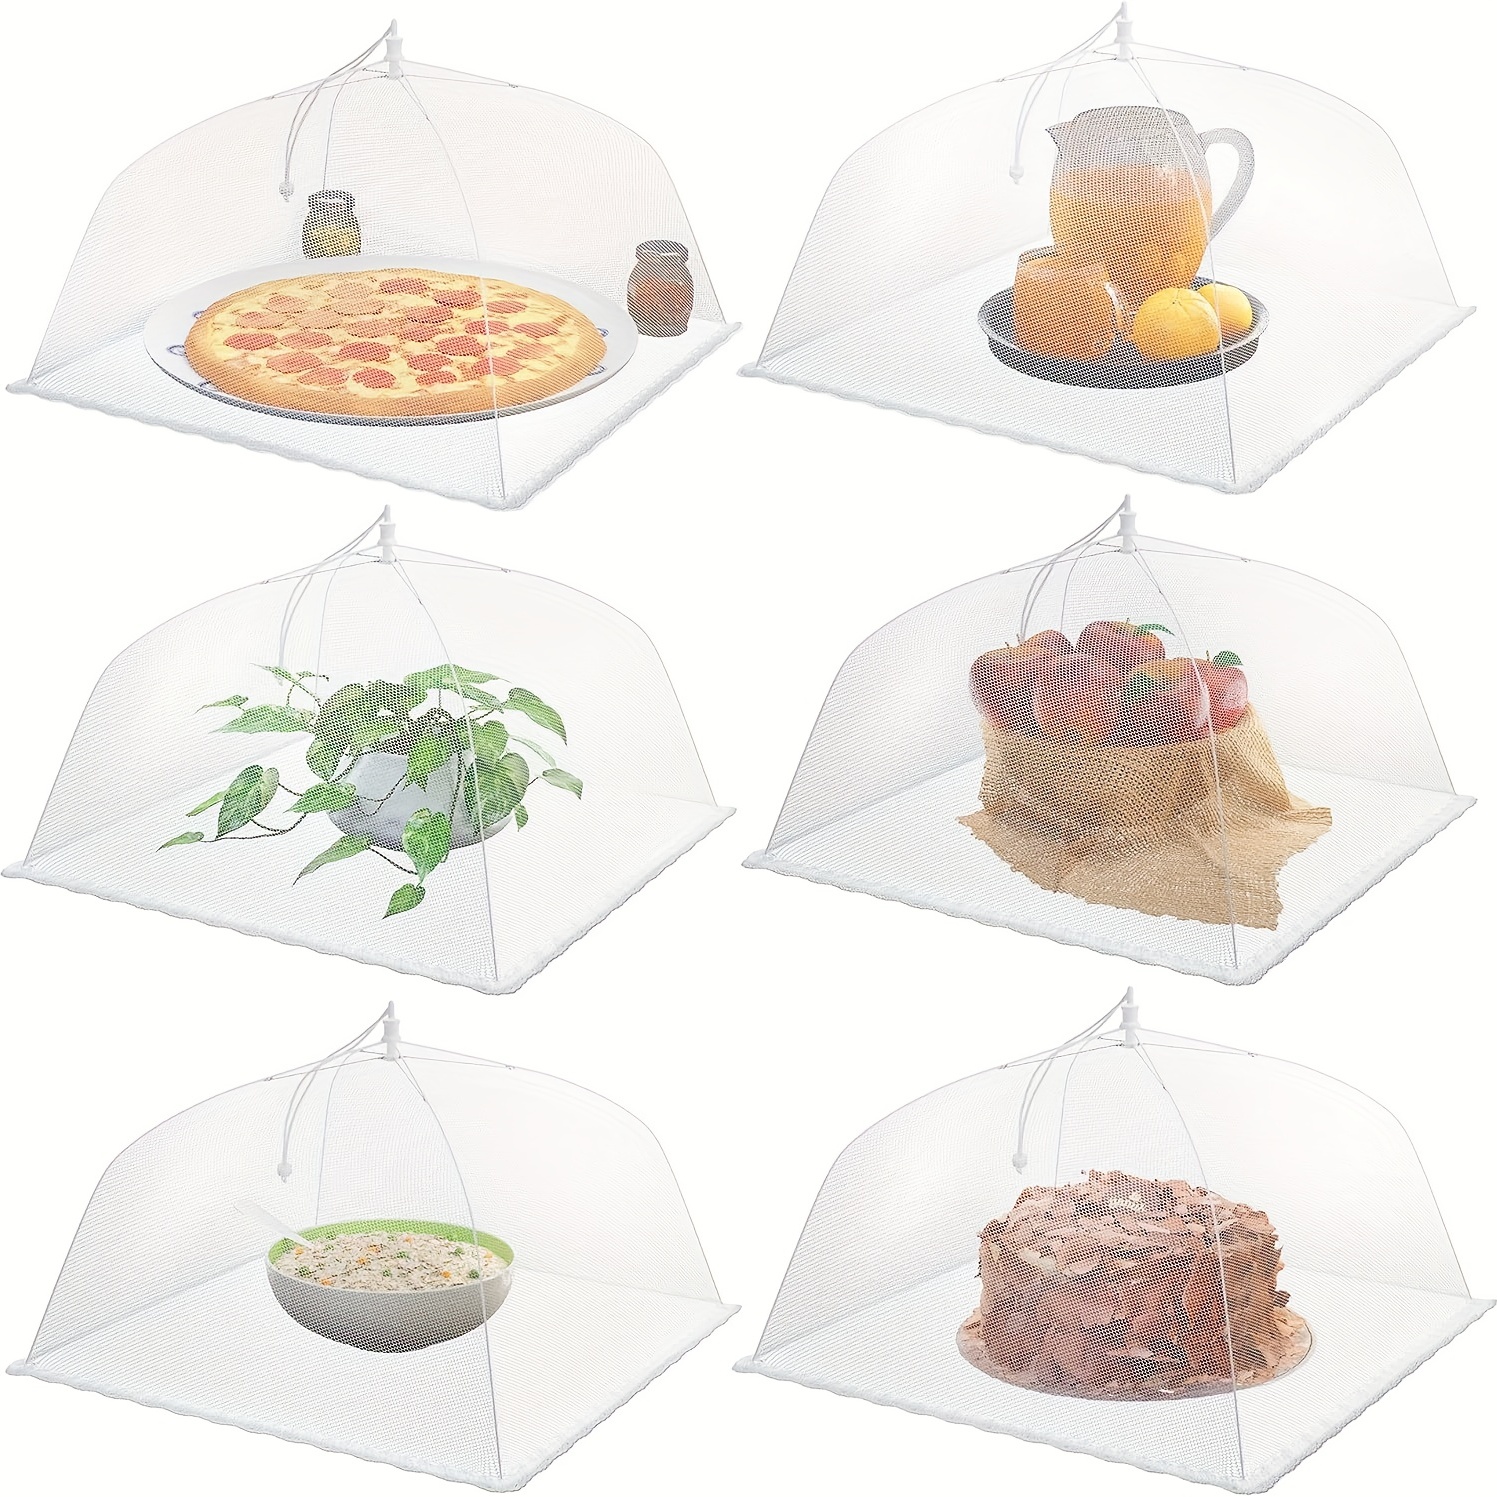 

3pcs Large And Tall Pop-up Mesh Food Covers Tent Umbrella For Outdoors, Screen Tents, Parties Picnics, Bbqs, Reusable And Collapsible Food Tents